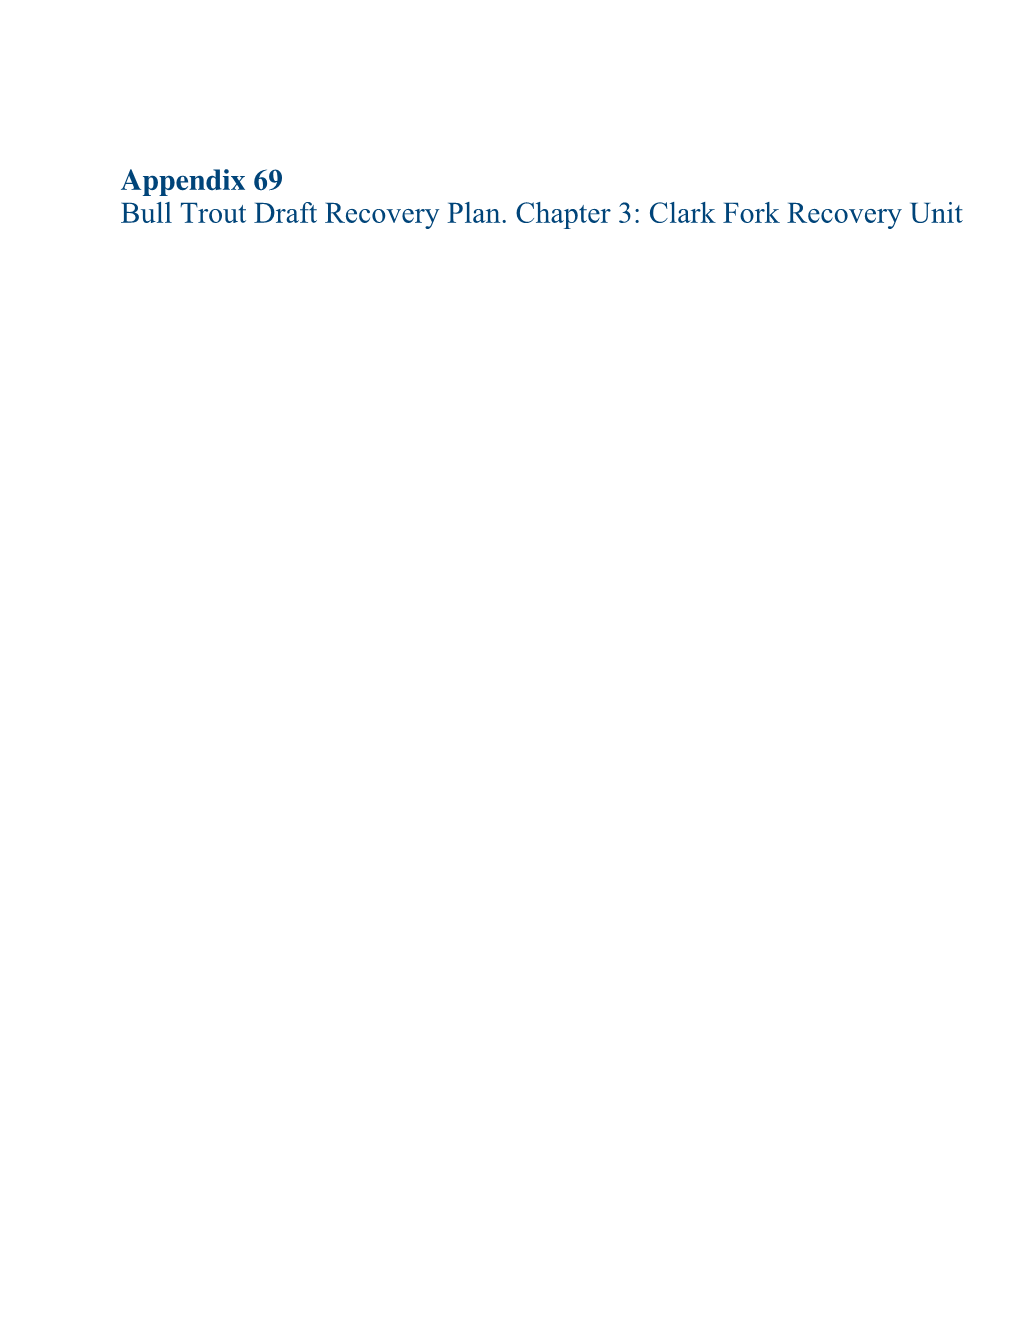 Appendix 69 Bull Trout Draft Recovery Plan. Chapter 3: Clark Fork Recovery Unit Chapter 3